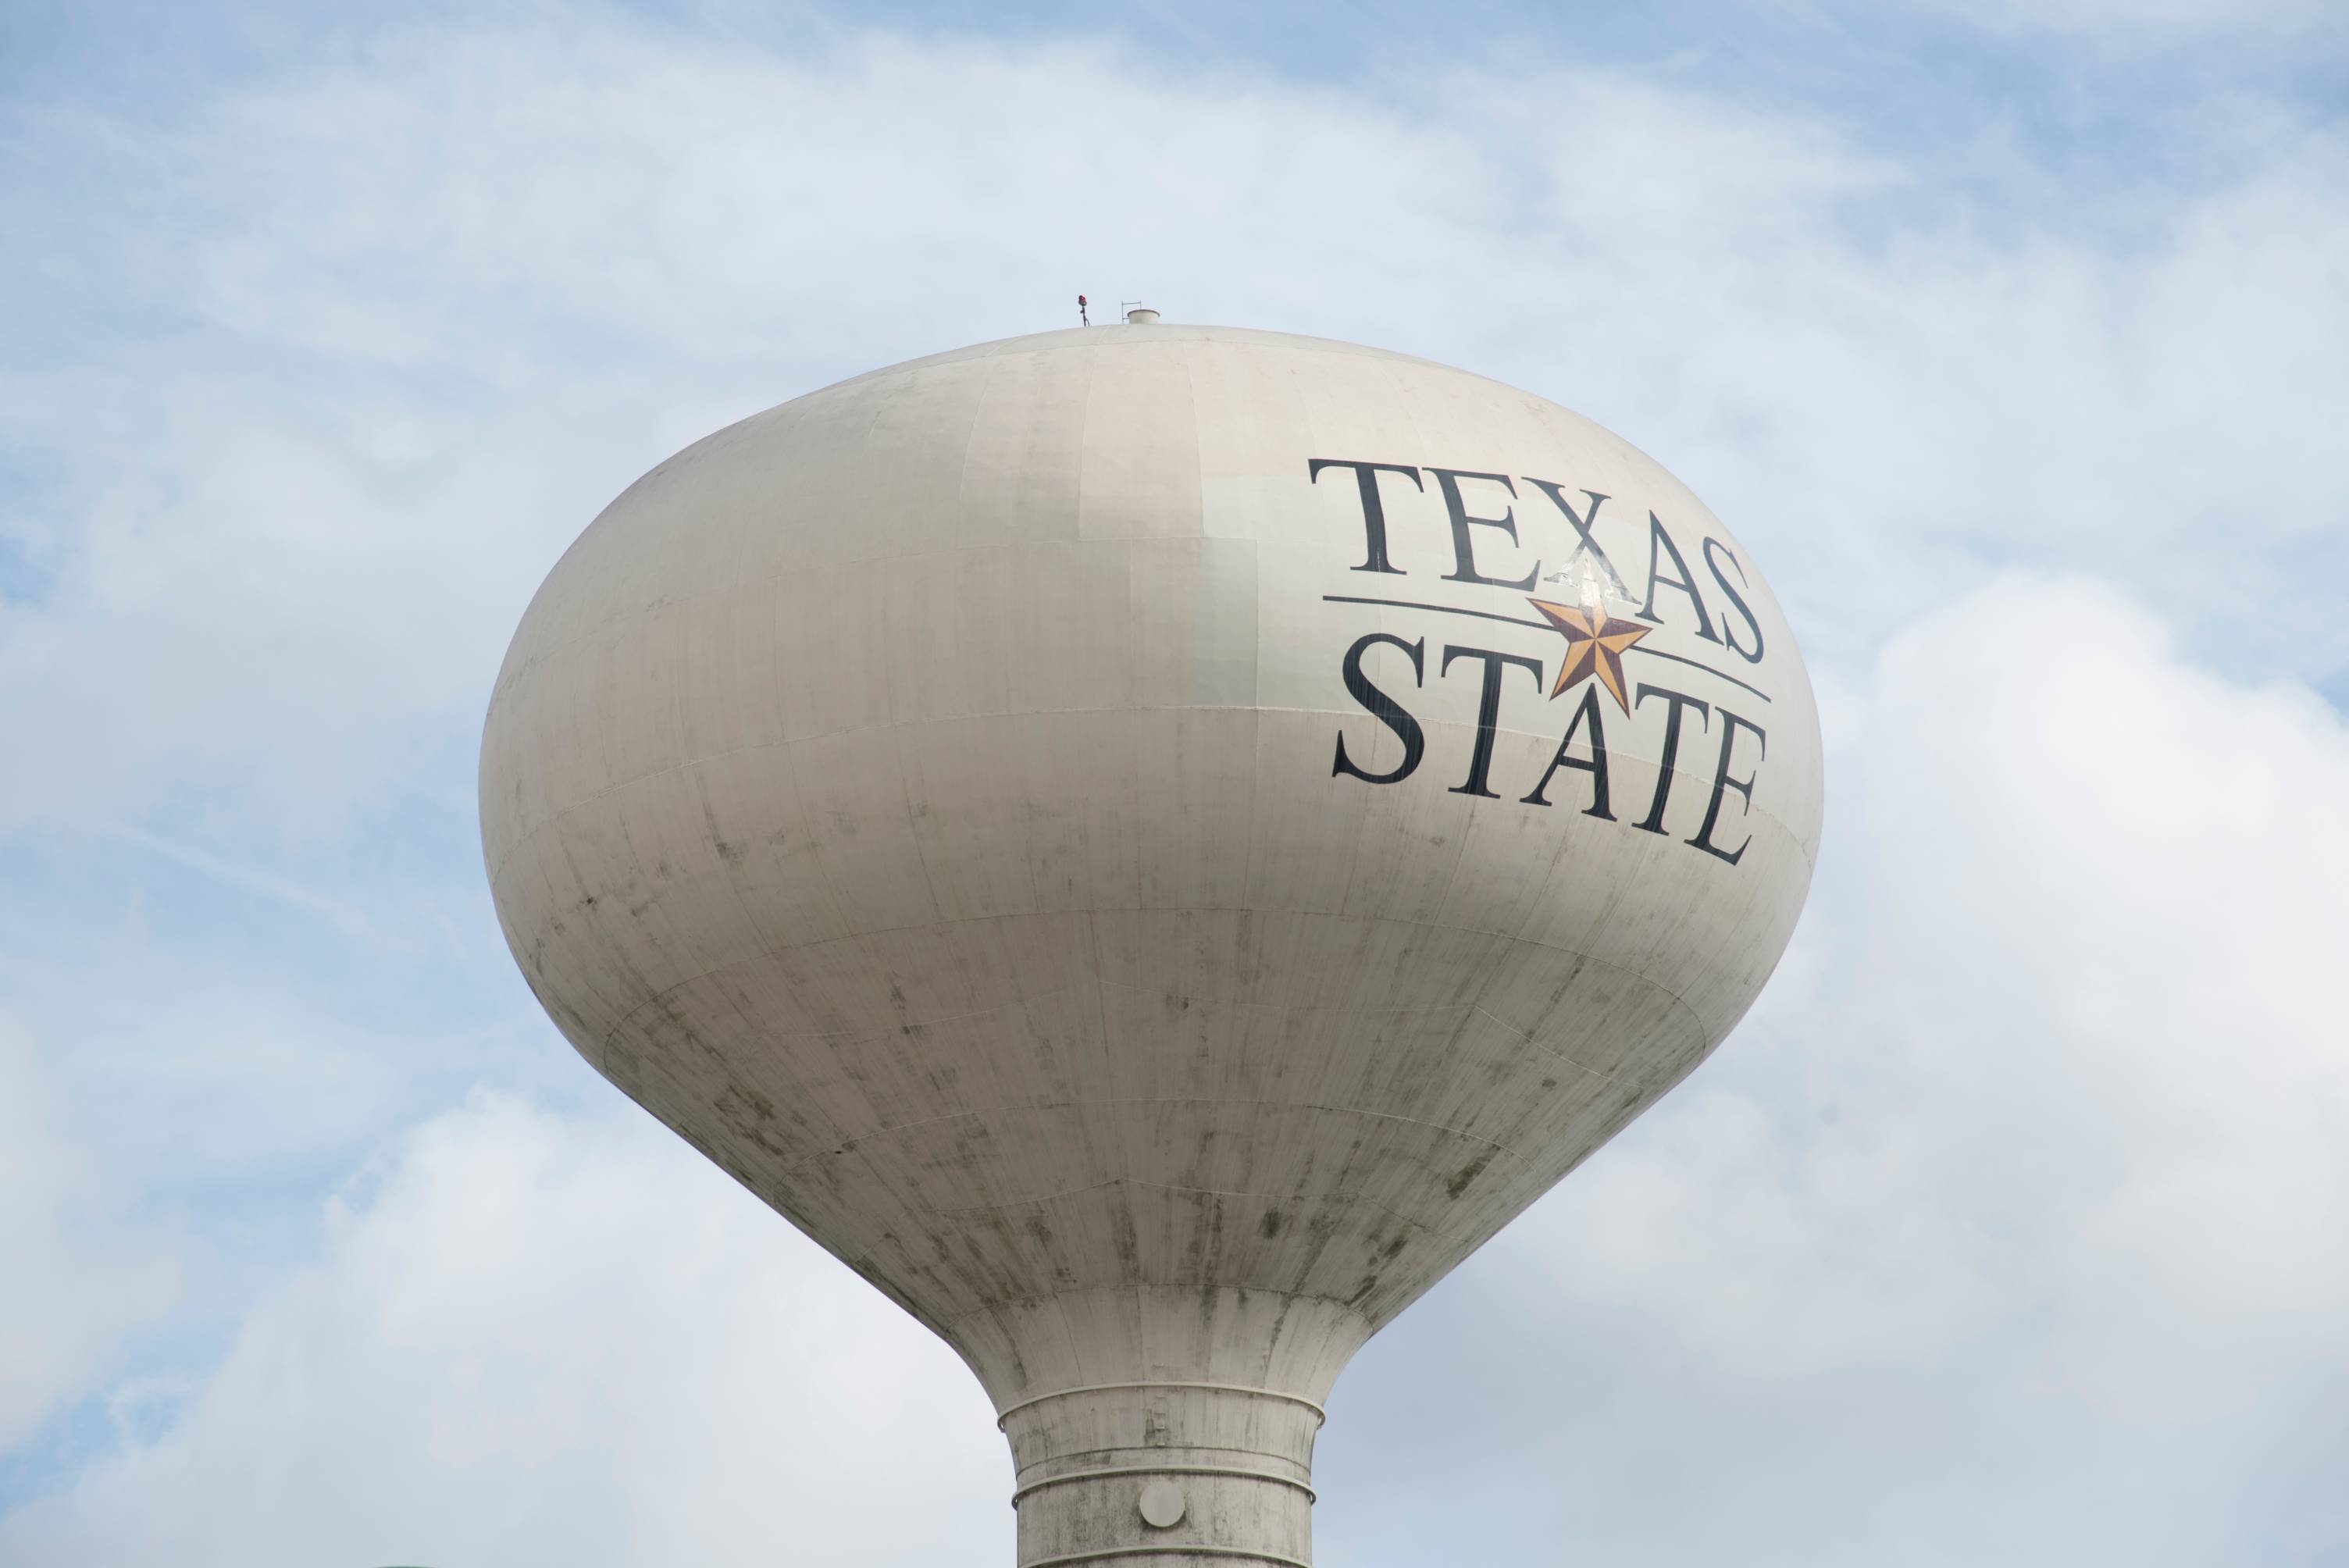 Texas State water tower